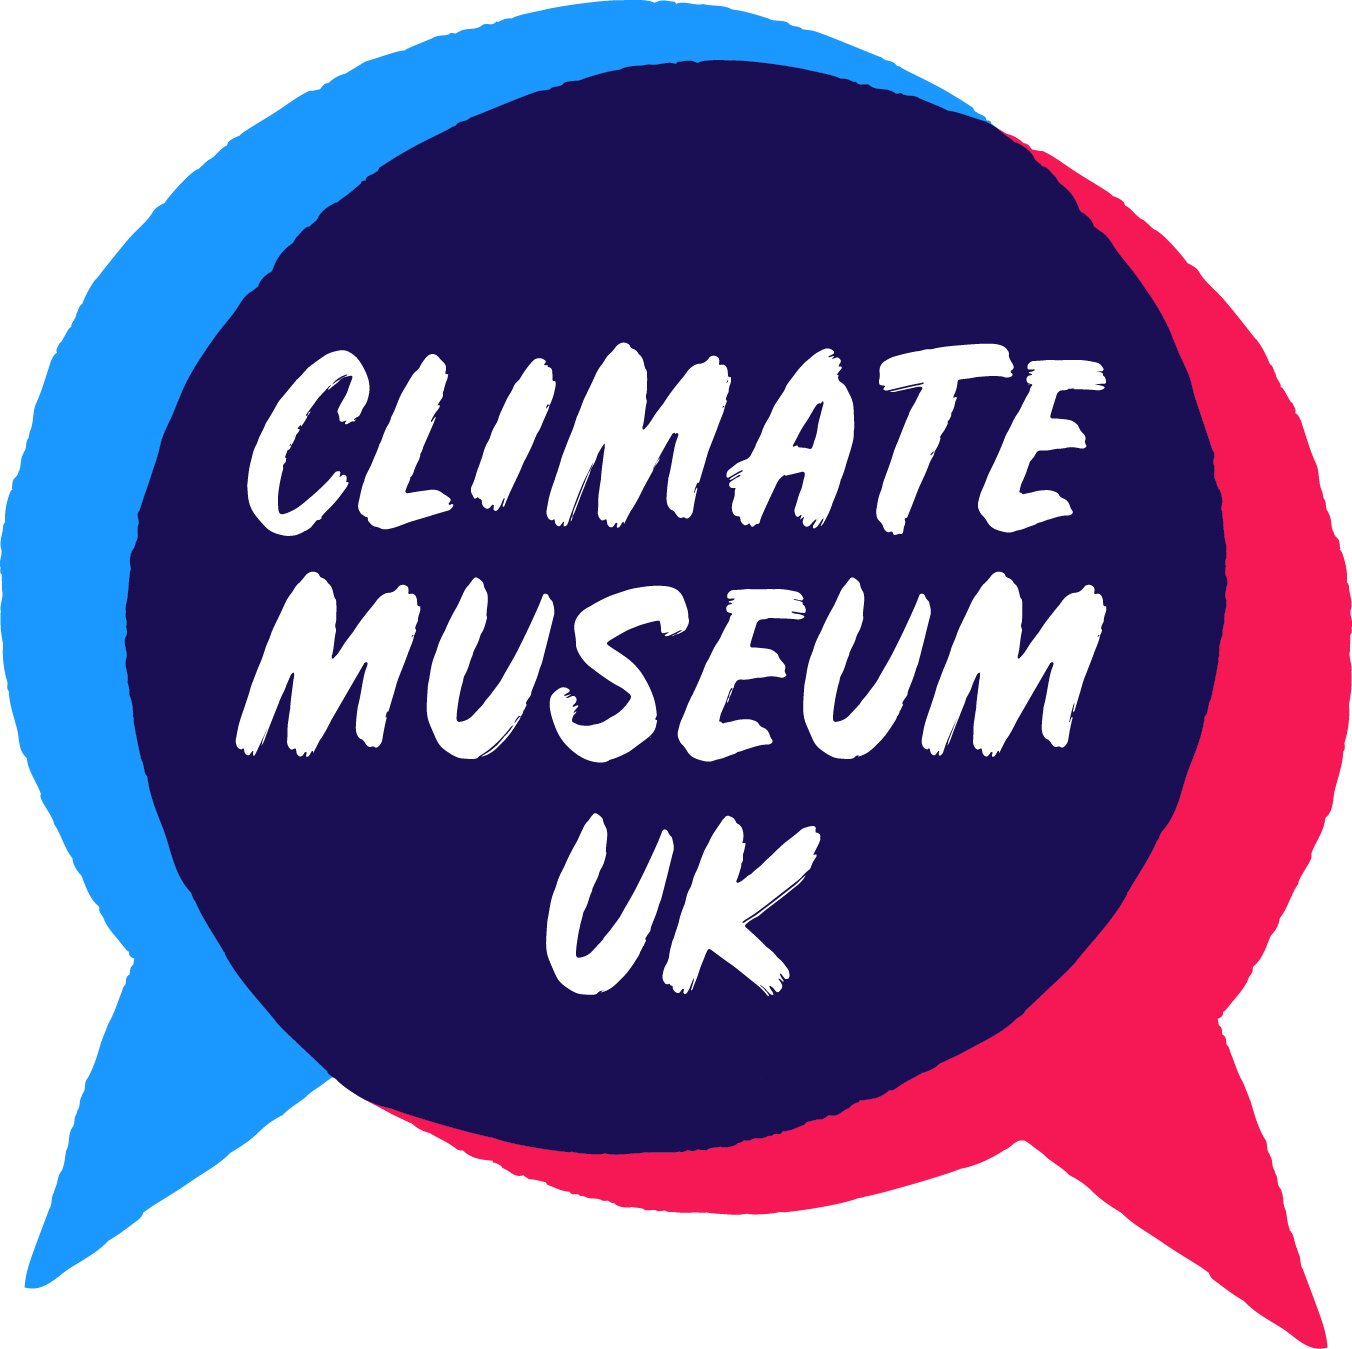 Climate museum UK